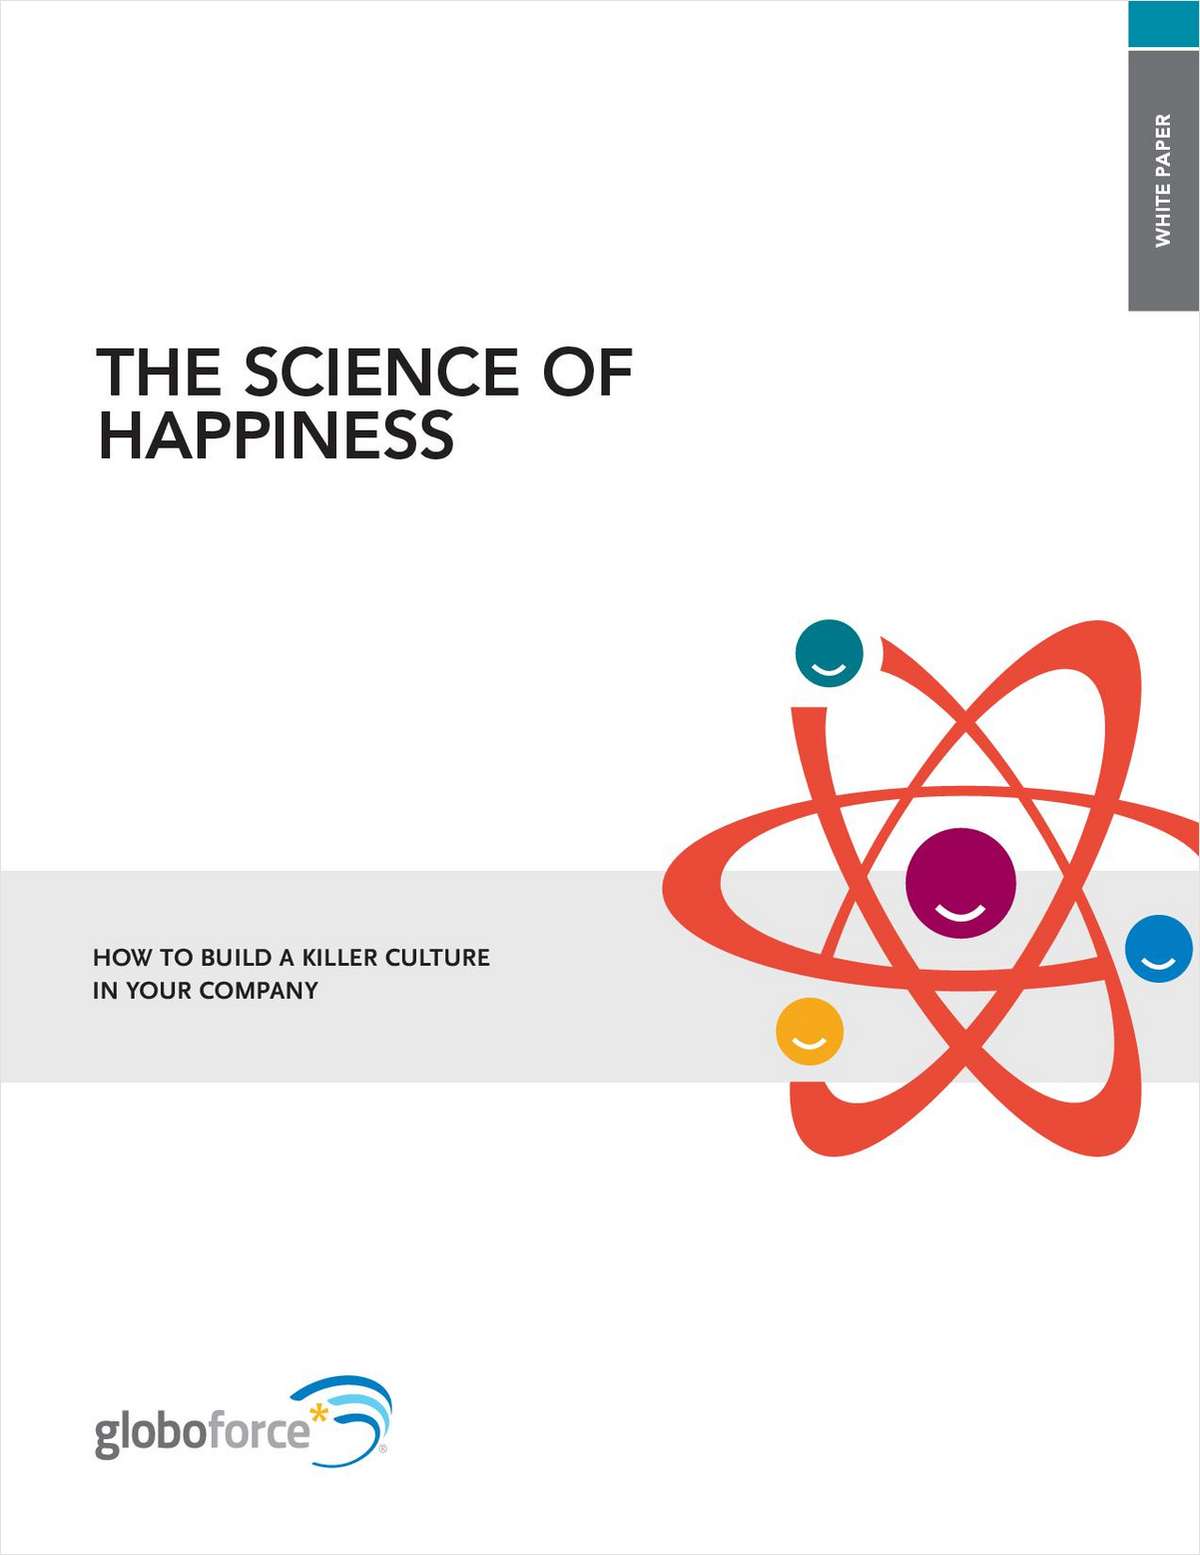 http://magz.tradepub.com/free-offer/the-science-of-happiness-in-your-company/w_glob44?sr=hicat&_t=hicat:1206